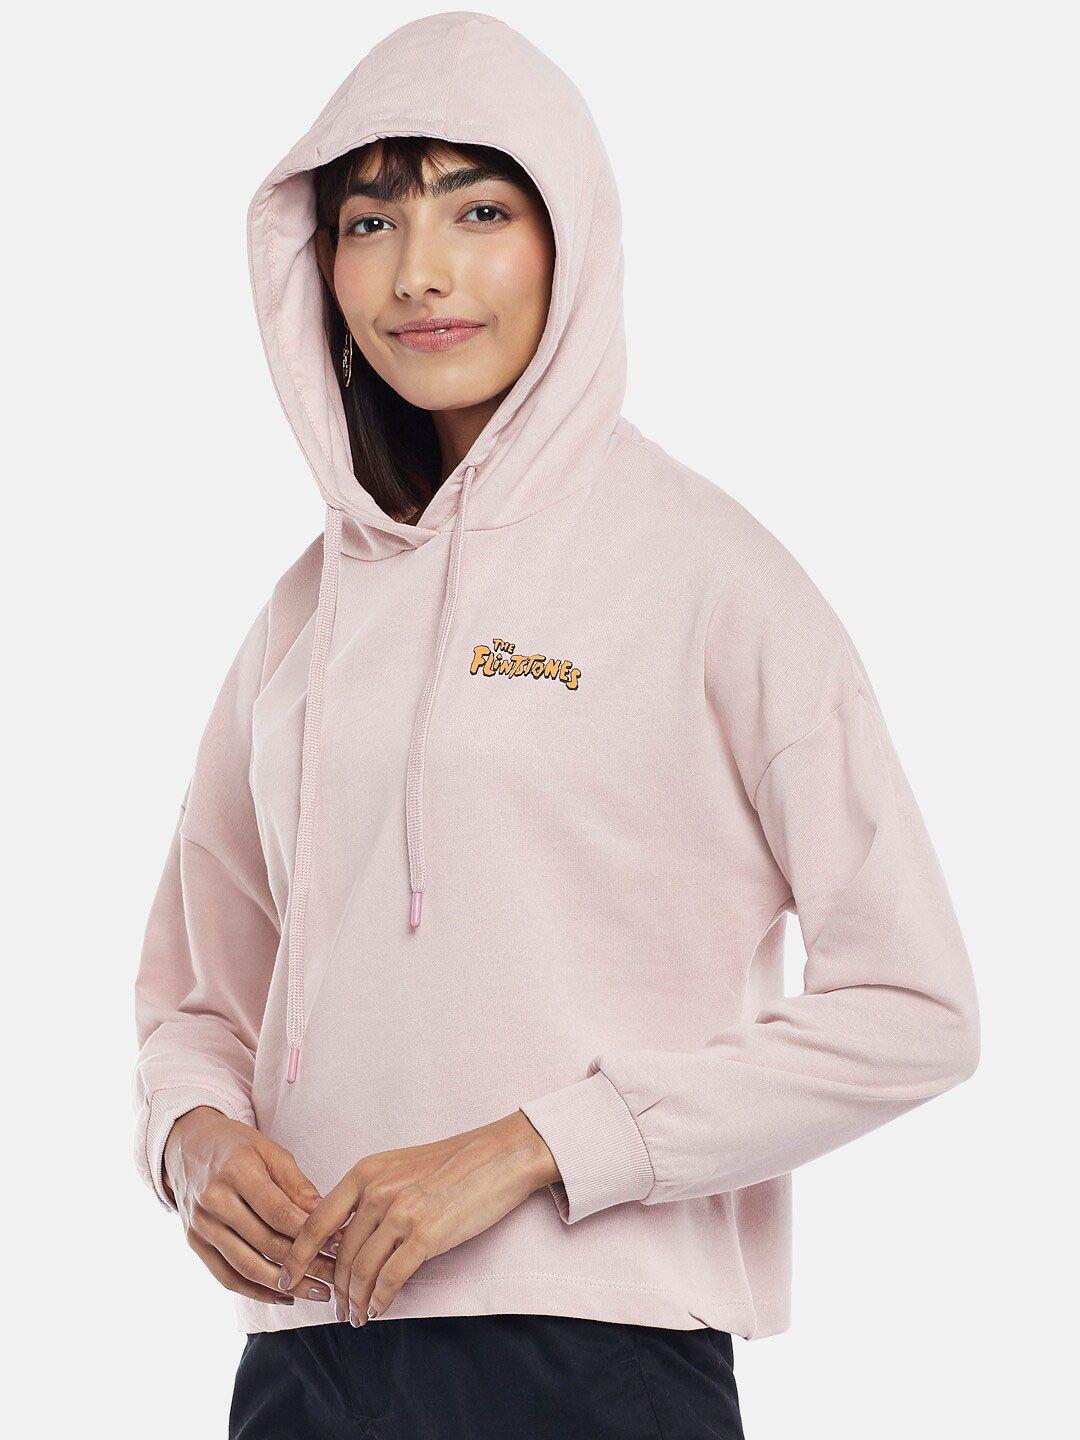 honey by pantaloons graphic printed hooded cotton pullover sweatshirt